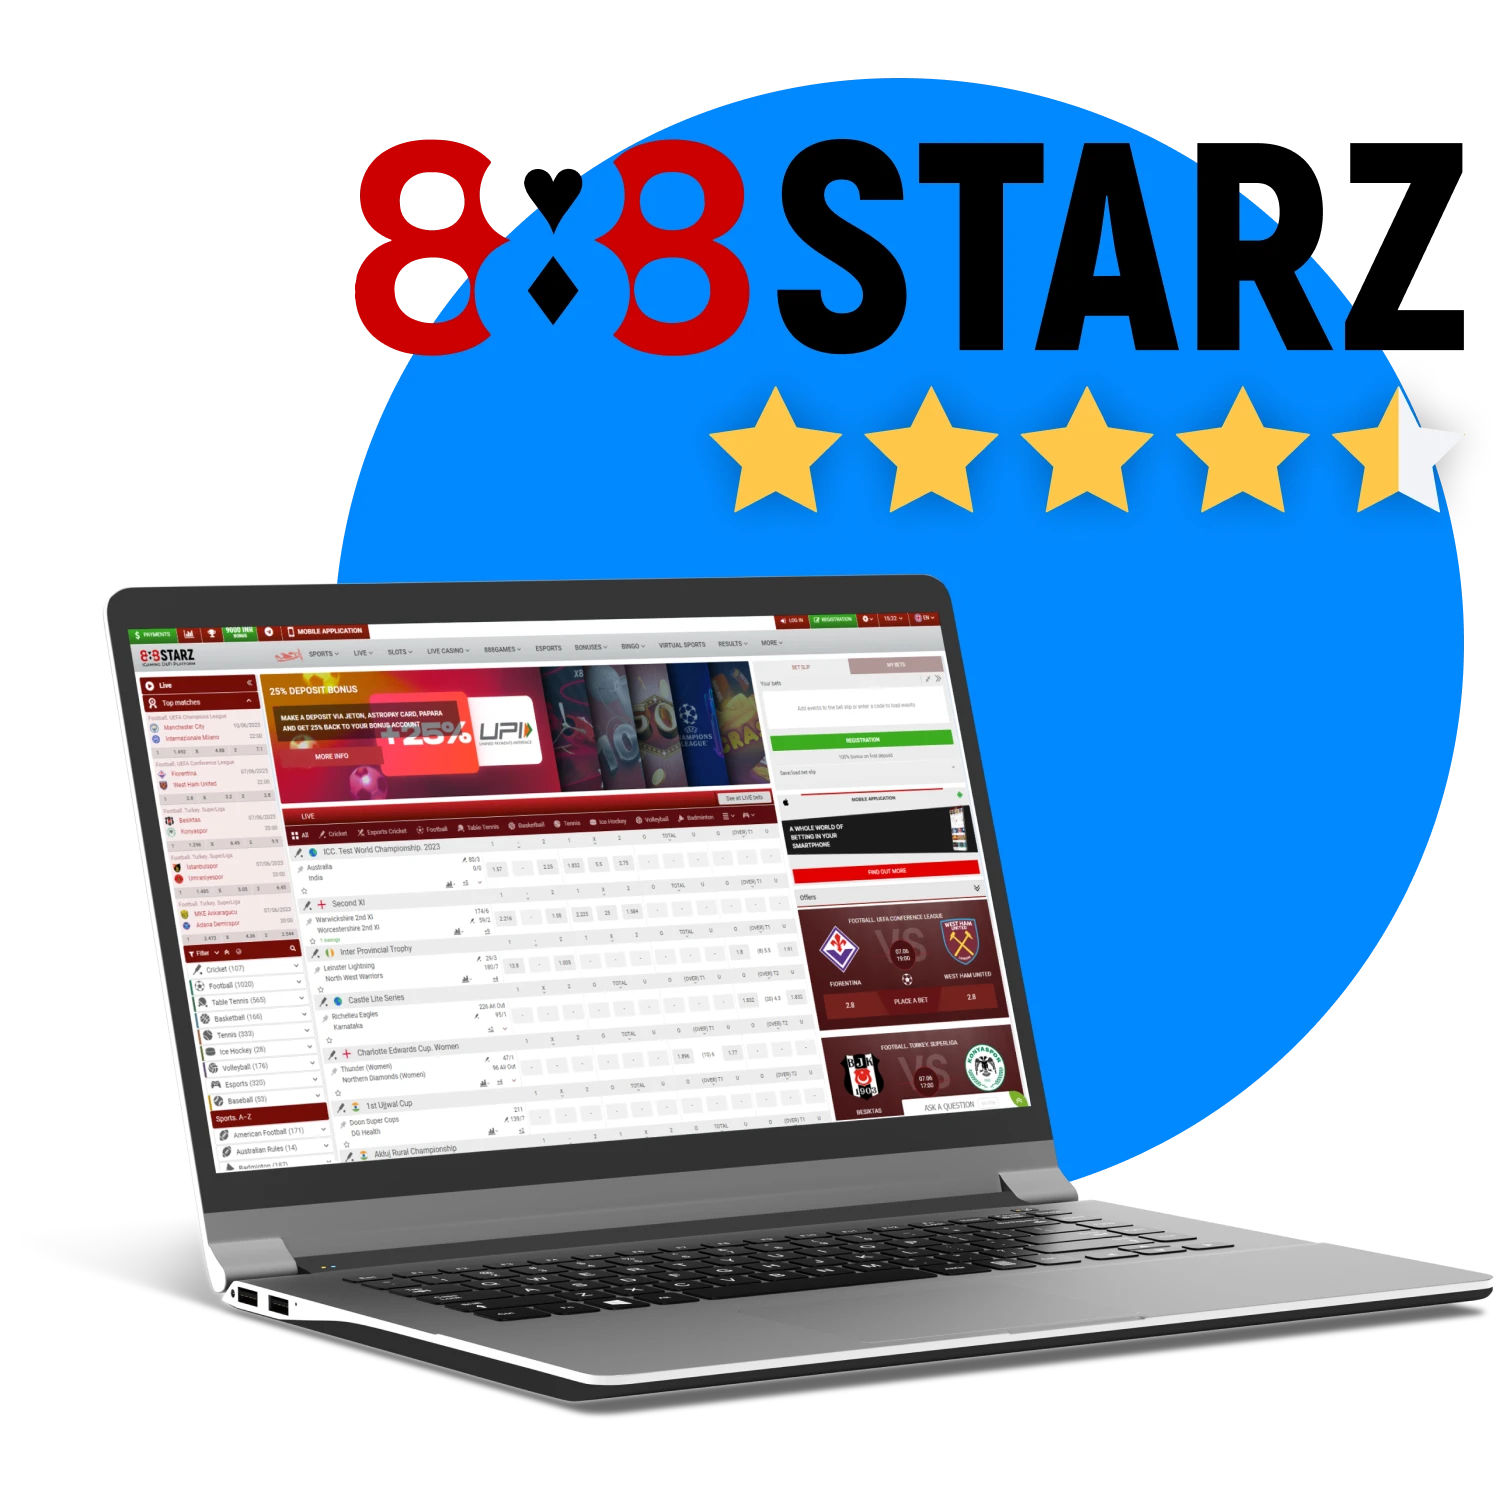 Verified reviews of 888starz in India.